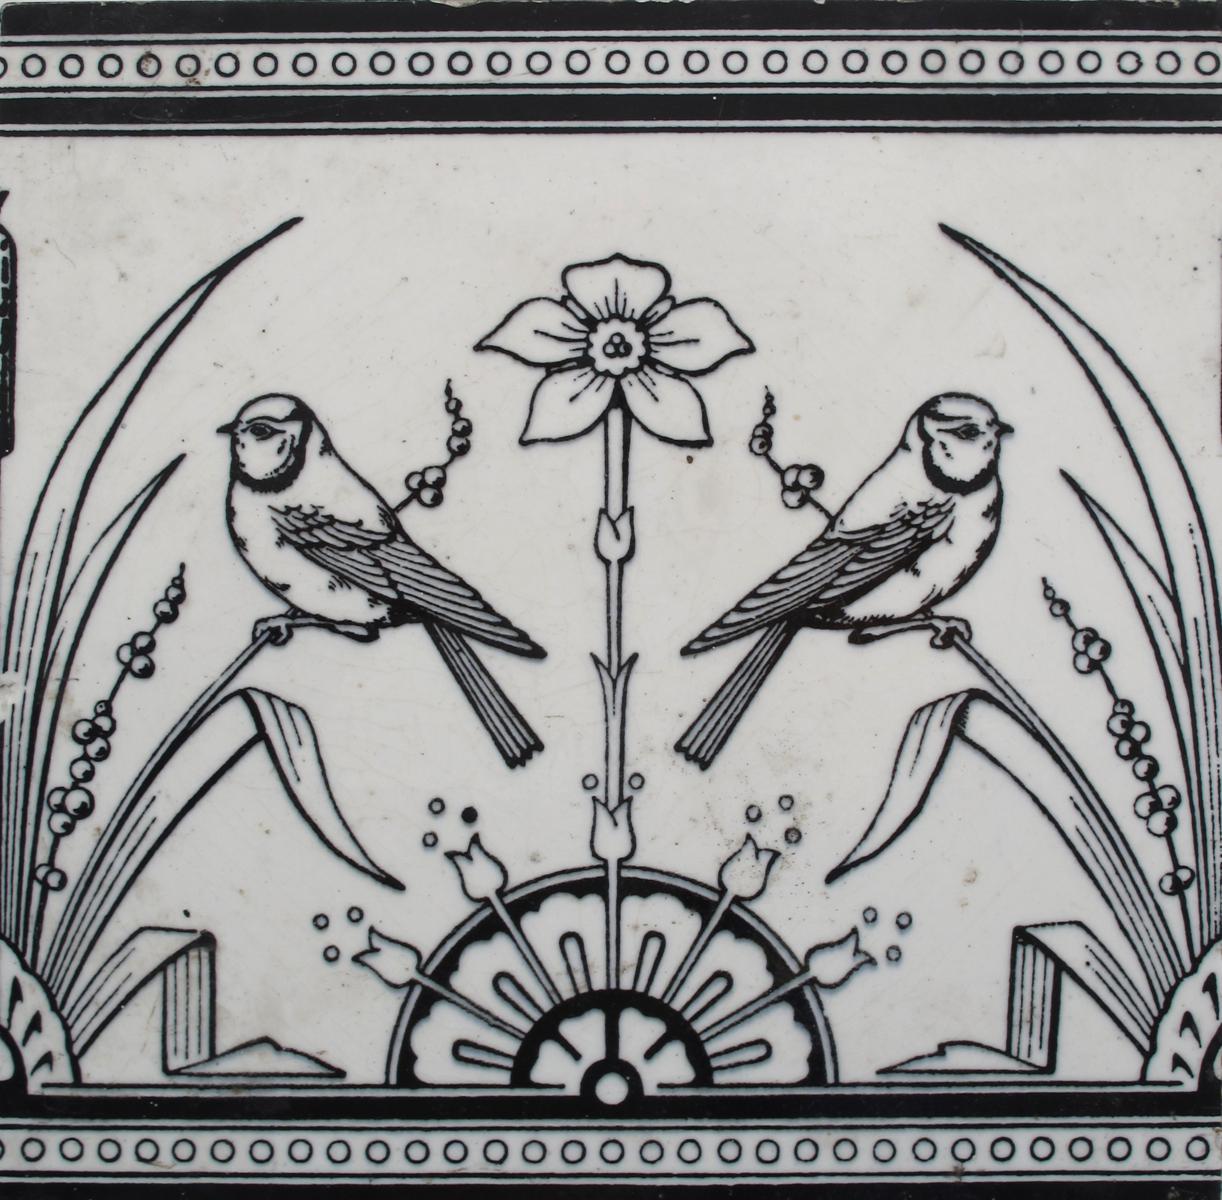 A Minton`s Pottery tile designed by Dr Christopher Dresser, printed in black with birds flanking a